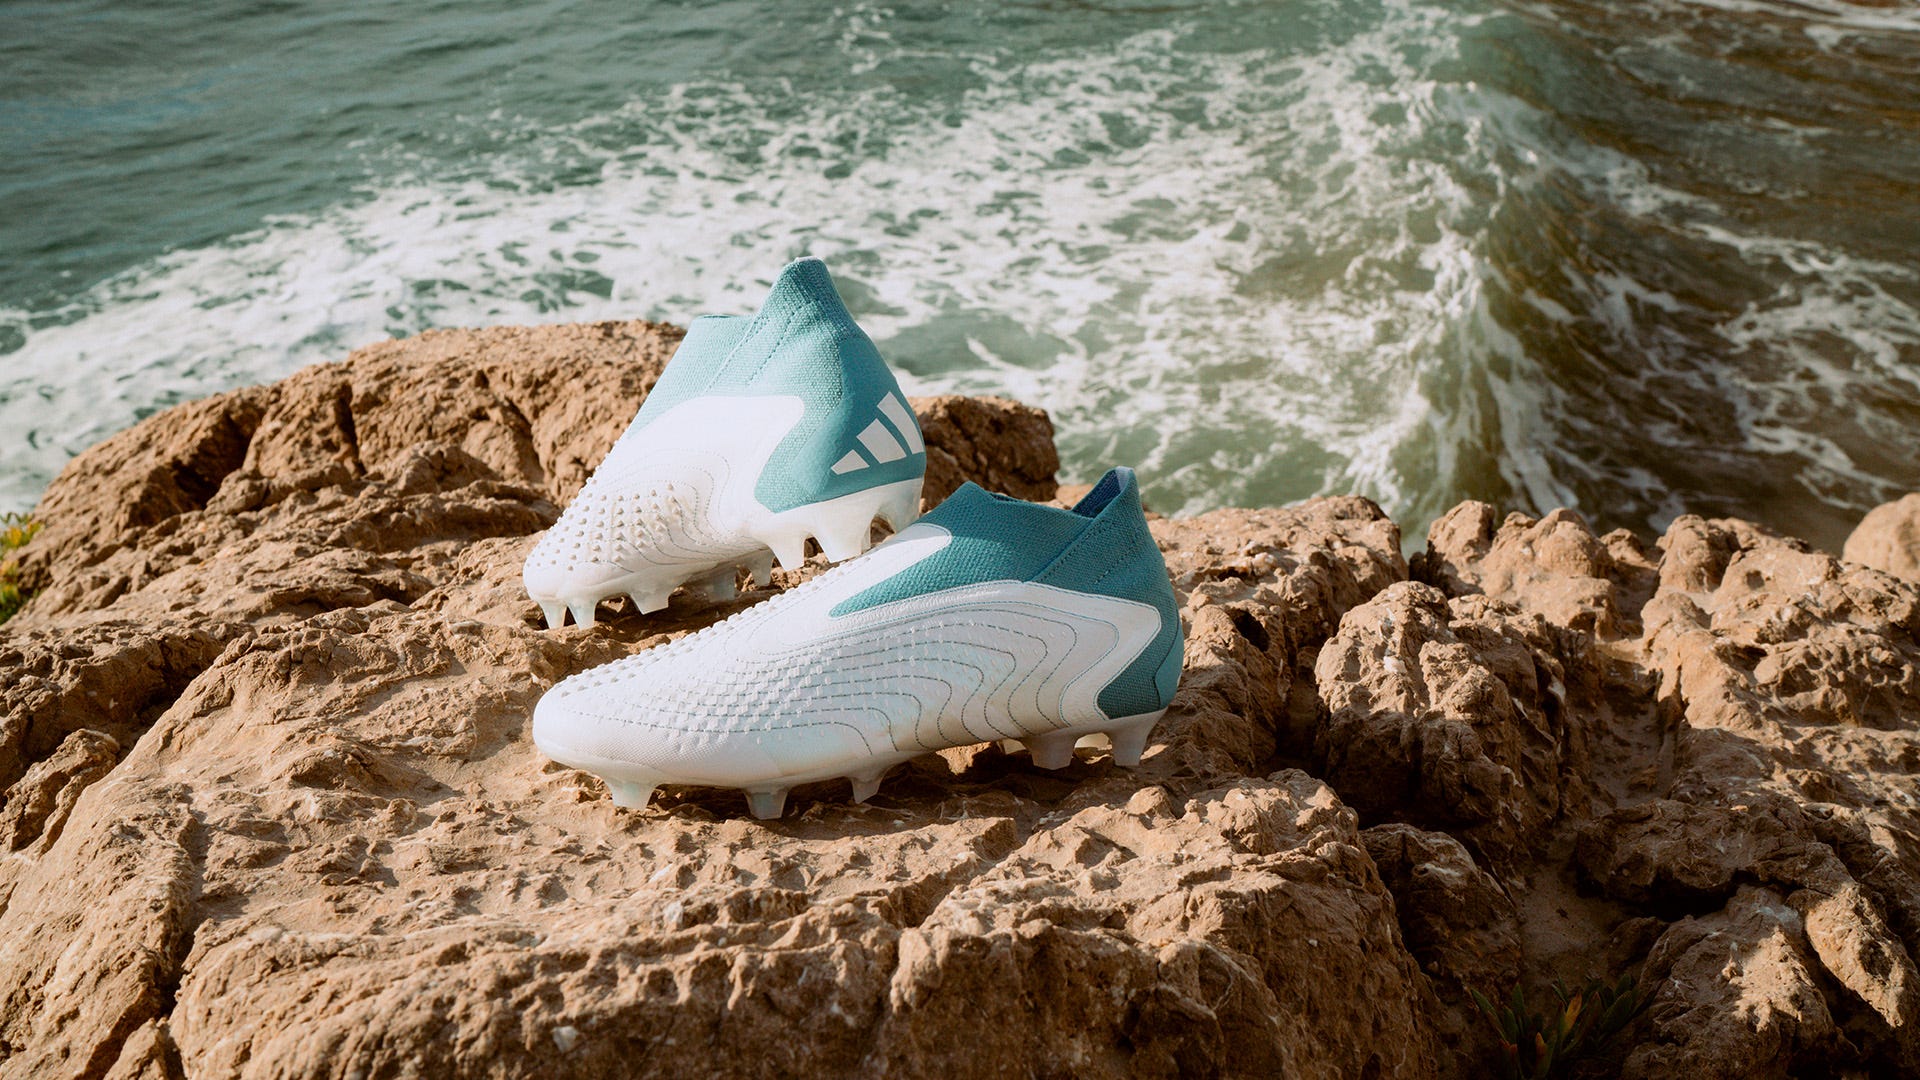 The adidas boot pack: the brands first boot pack designed to tackle waste | US